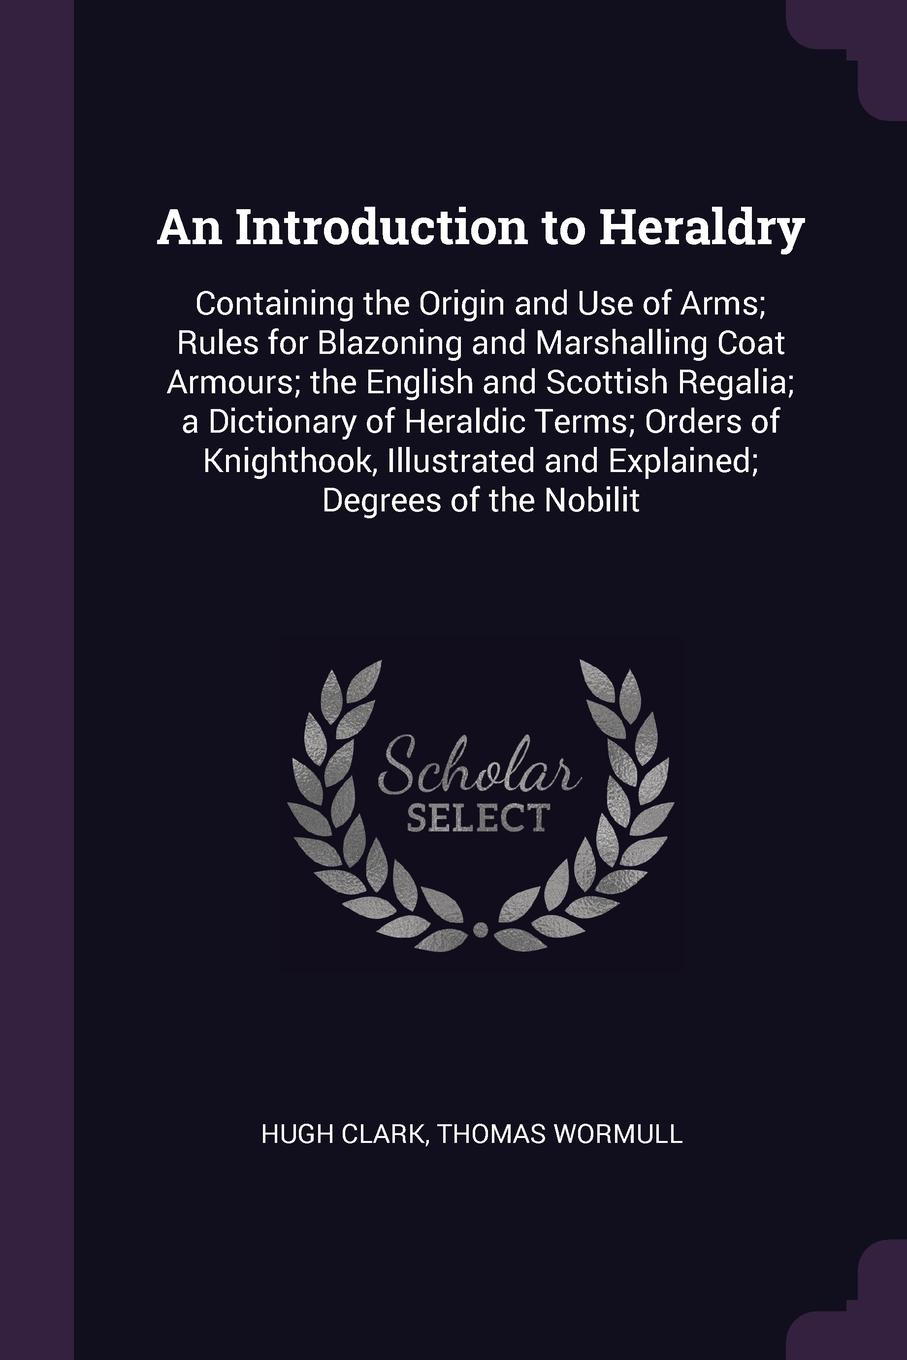 An Introduction to Heraldry. Containing the Origin and Use of Arms; Rules for Blazoning and Marshalling Coat Armours; the English and Scottish Regalia; a Dictionary of Heraldic Terms; Orders of Knighthook, Illustrated and Explained; Degrees of the...